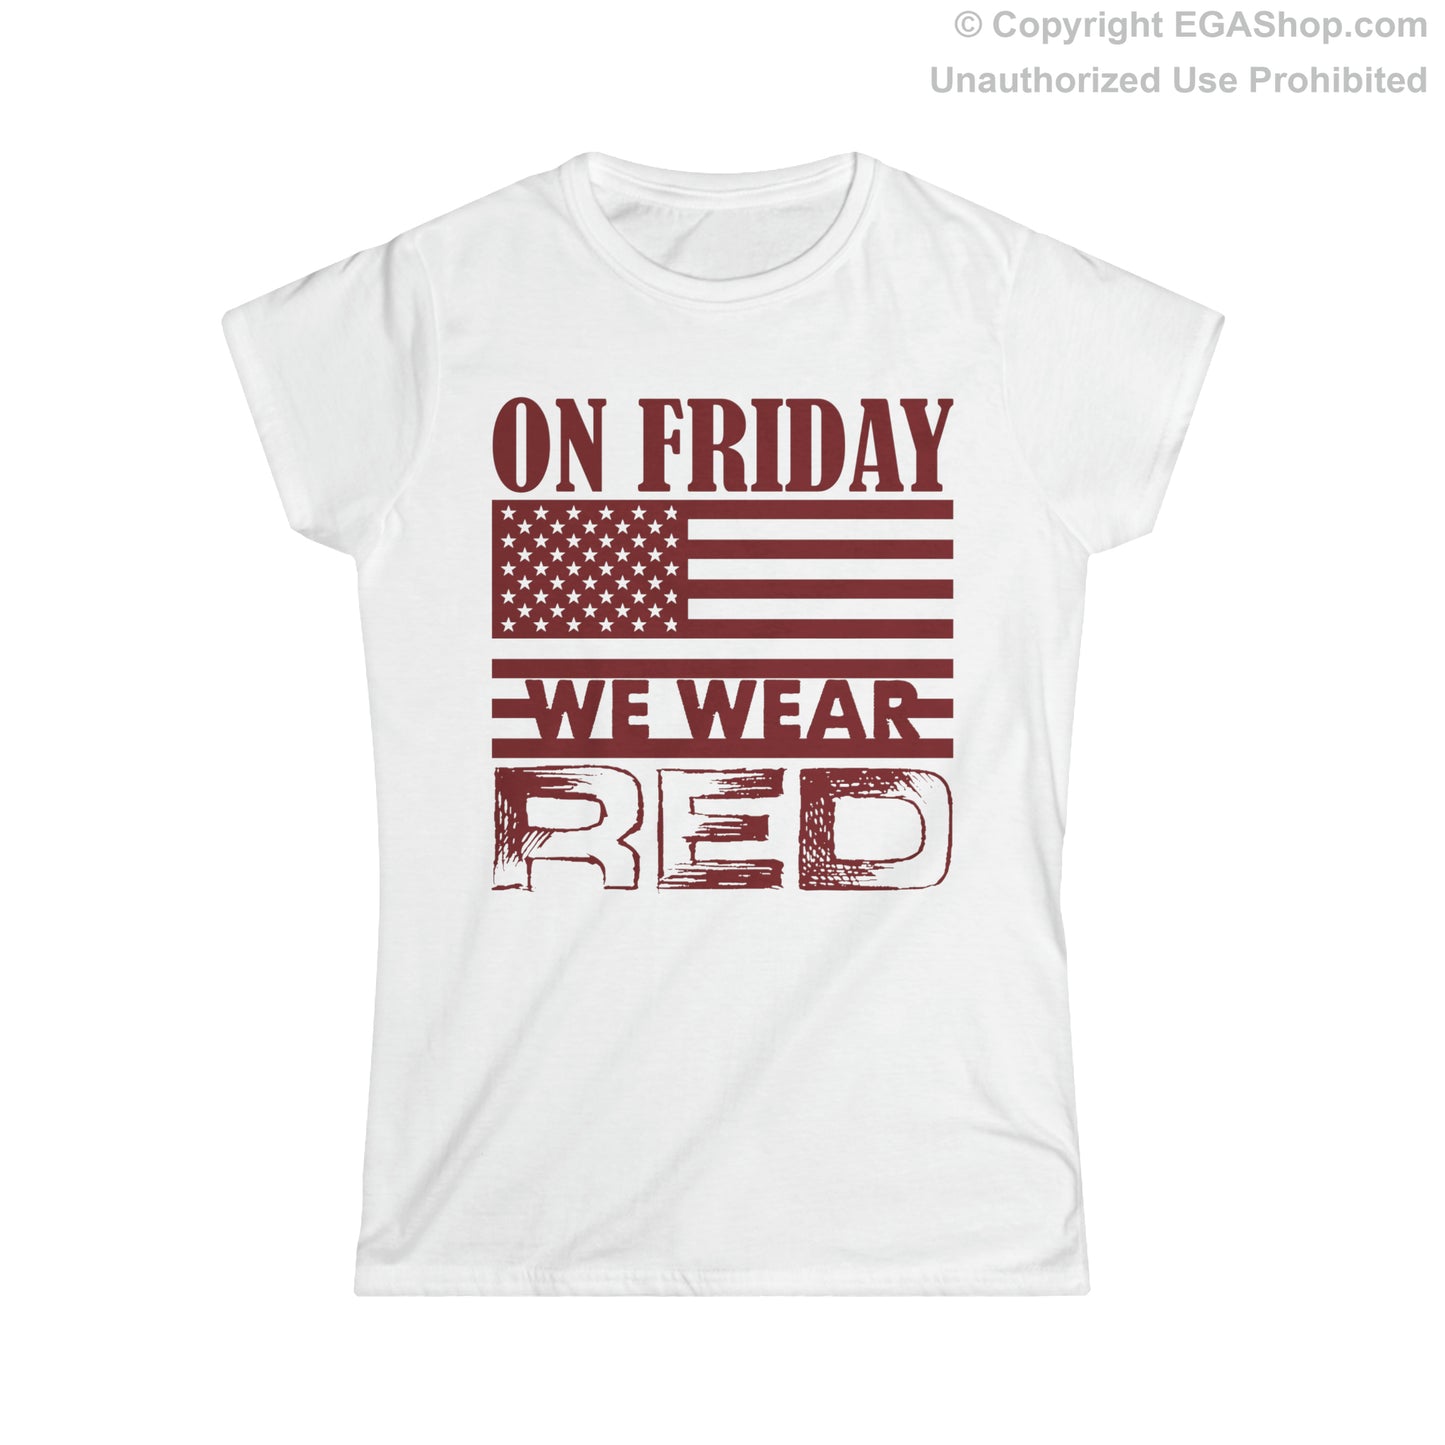 T-Shirt, Ladies Fit: On Friday We Wear Red